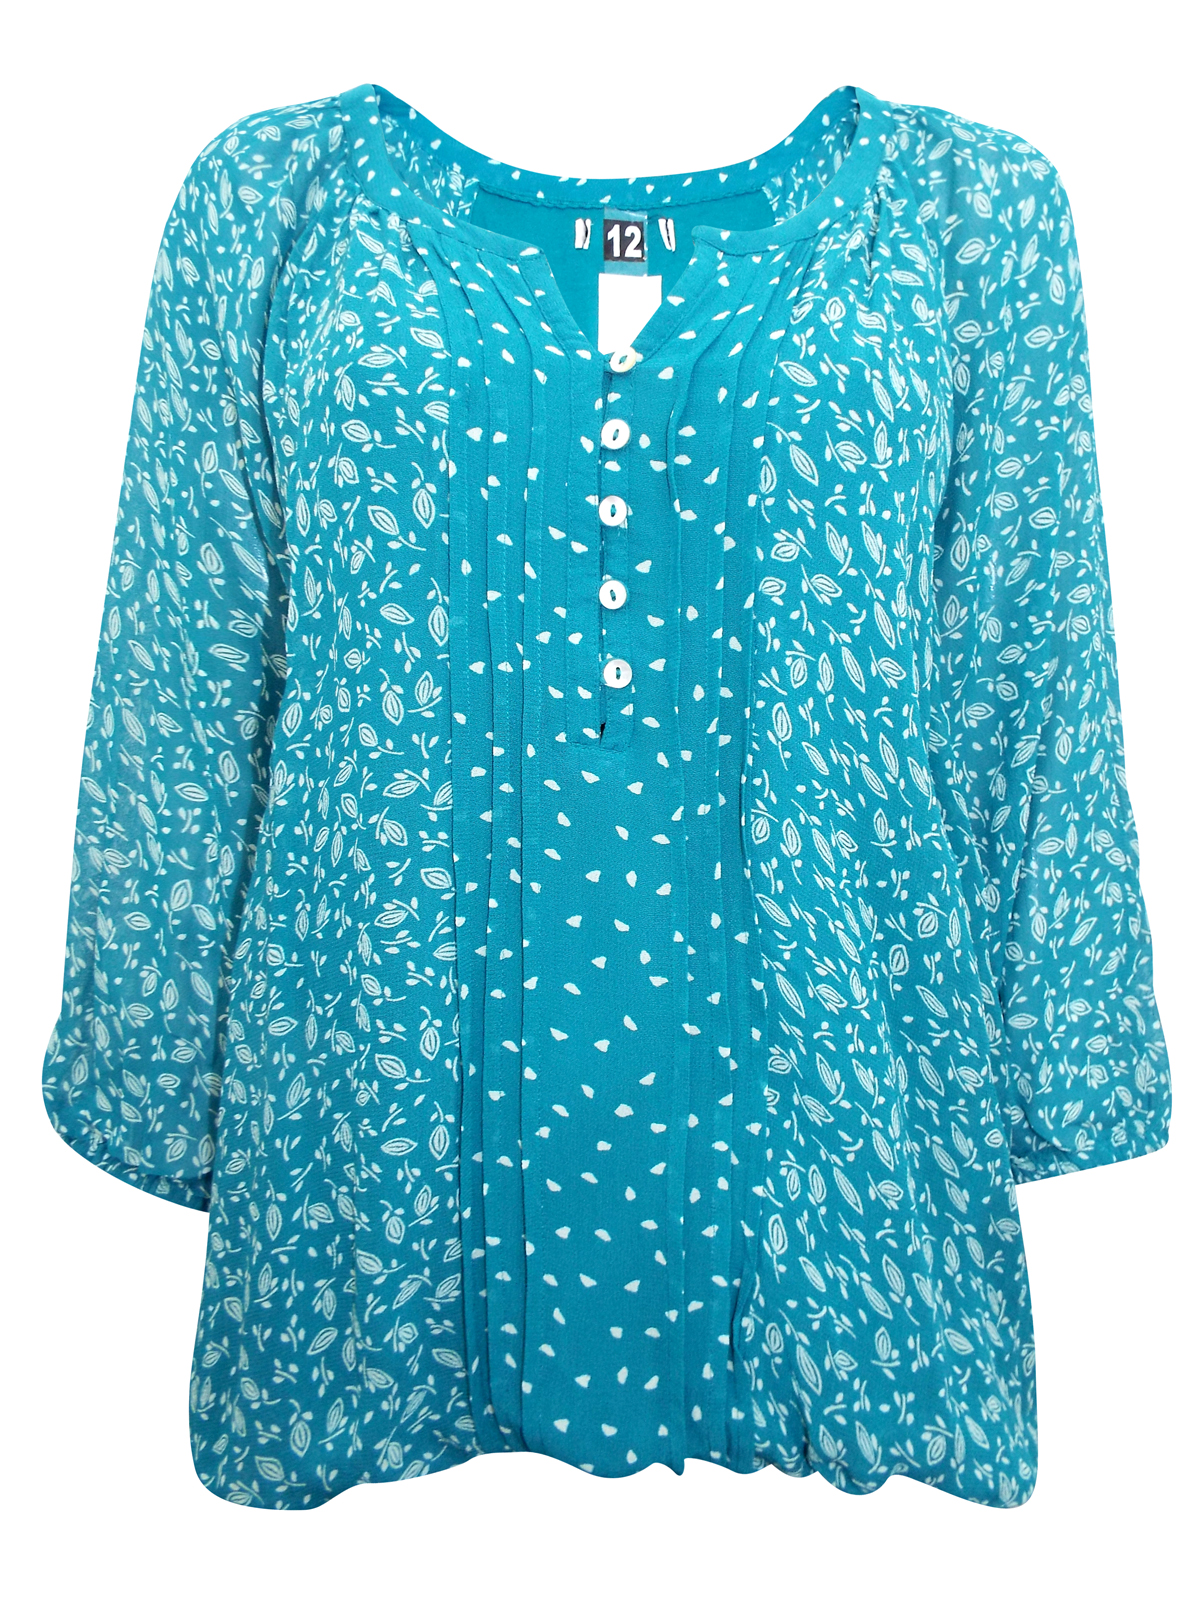 Marks and Spencer - - P3rUna GREEN Leaf Print Bubble Hem Top - Size 12 ...